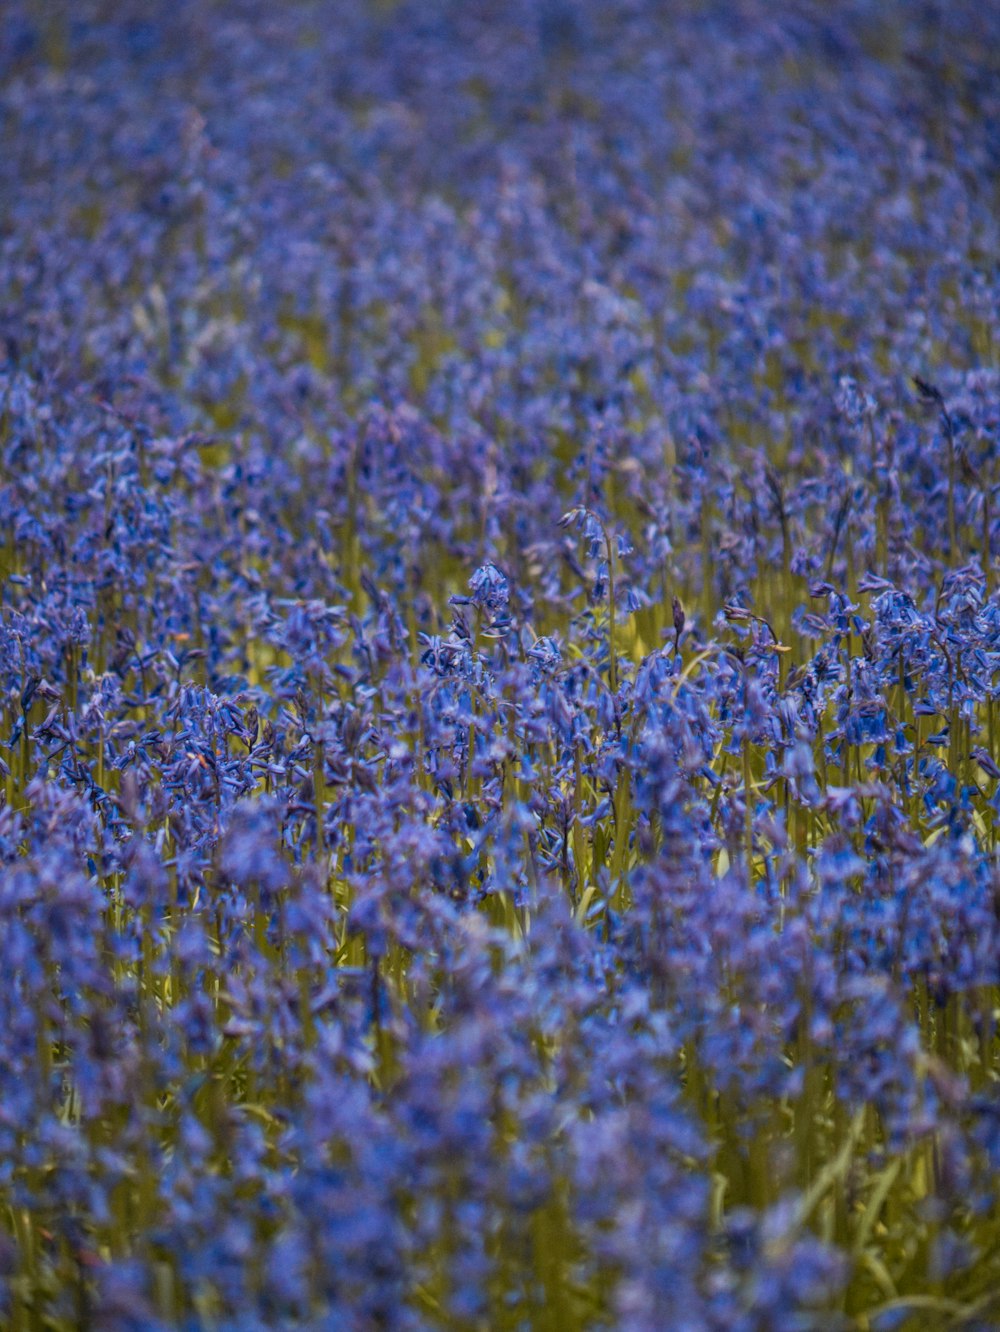 a field full of blue flowers with a bird in the middle of the field